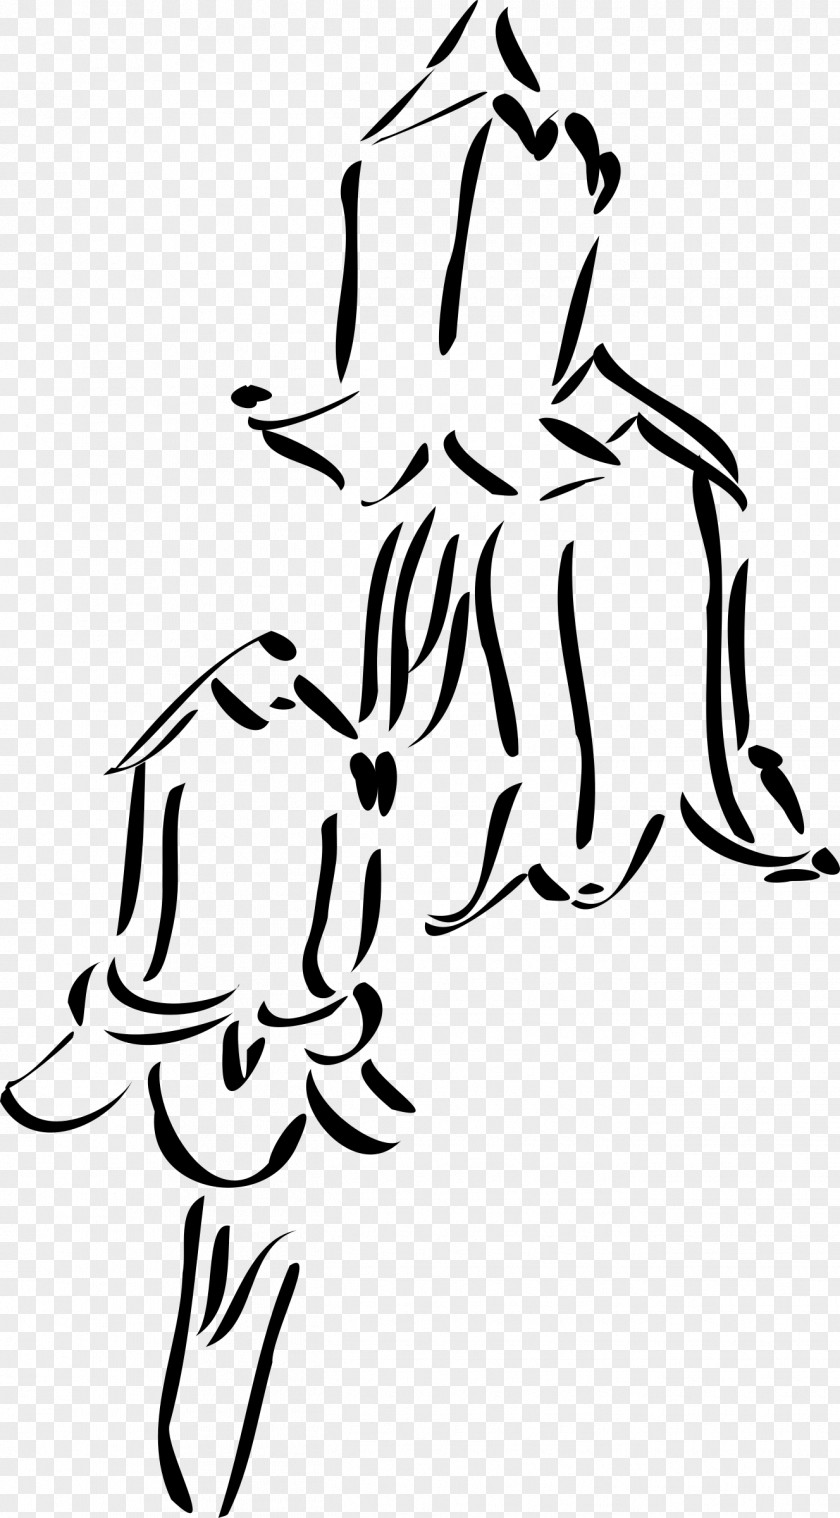 Outline Vector Black And White Clip Art PNG